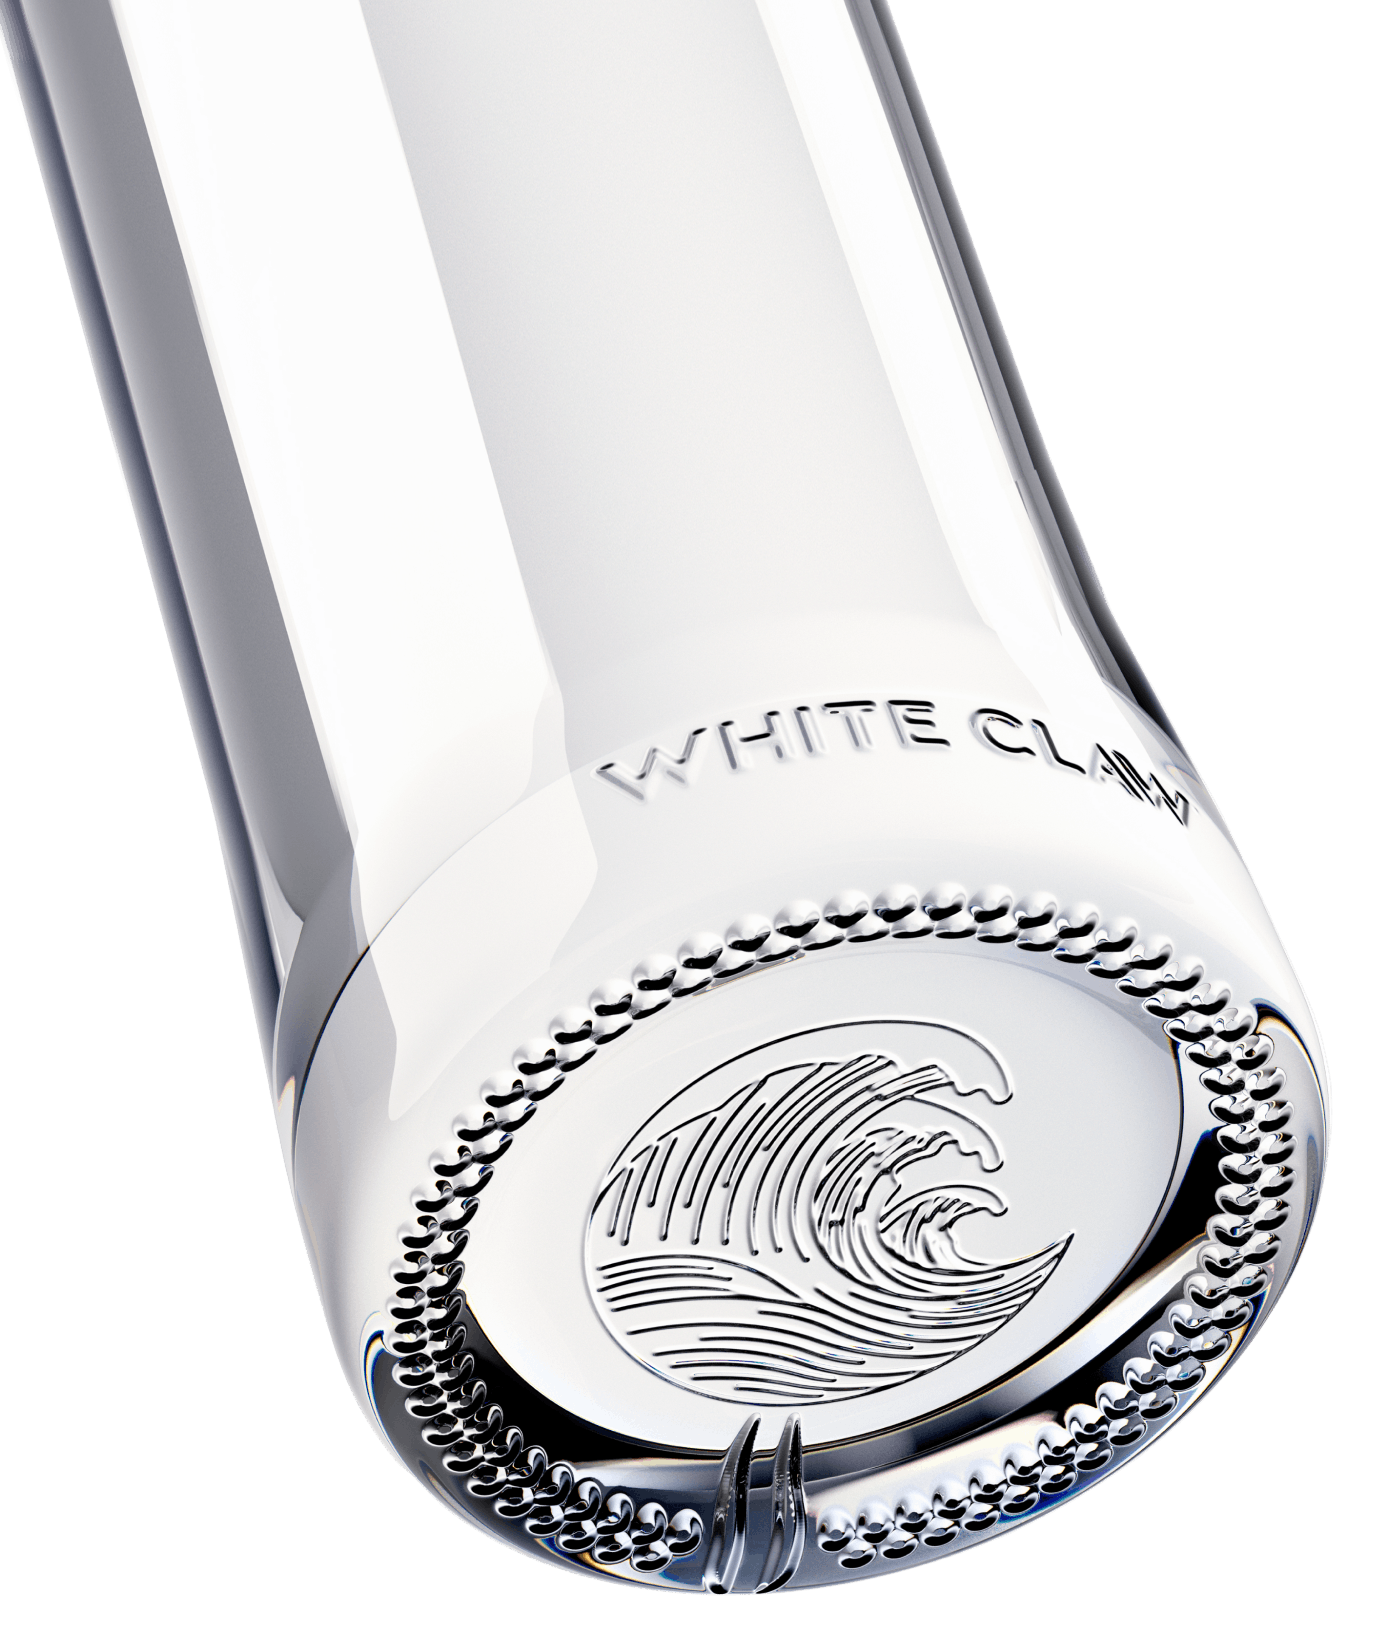 A bottle of White Claw™️ Premium Vodka is seen at an isometric angle from below